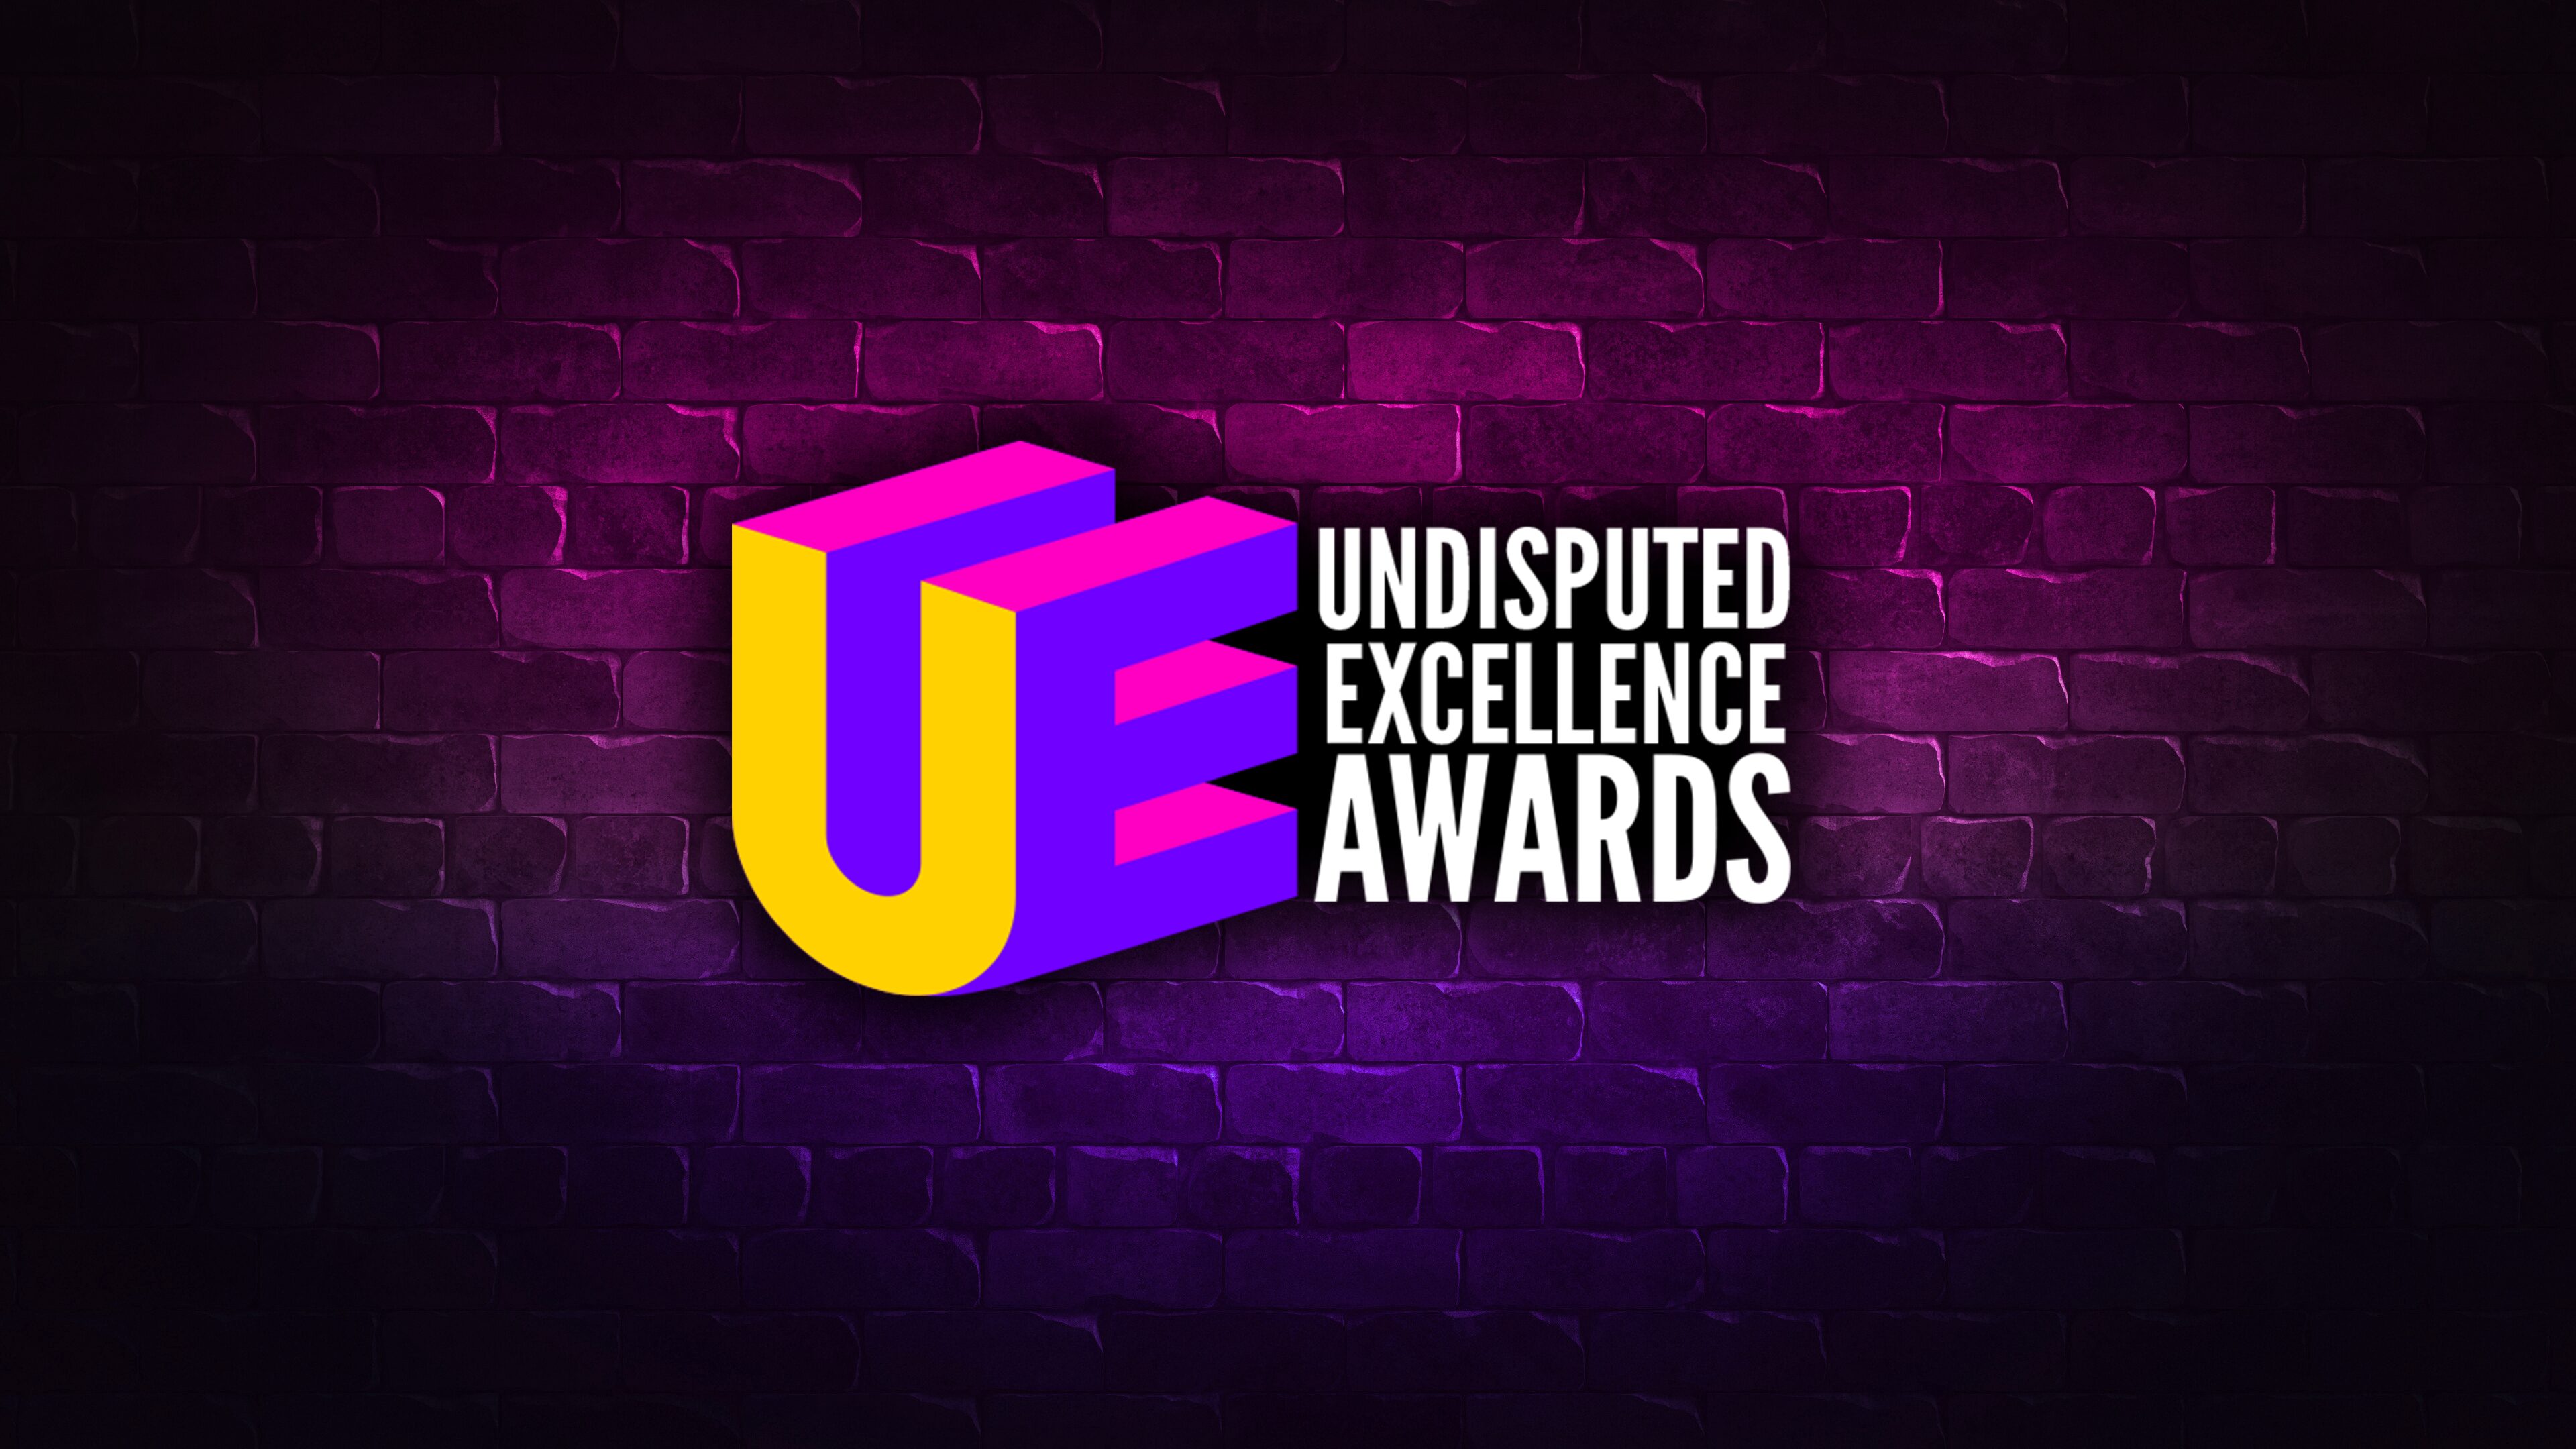 Undisputed Excellence Awards